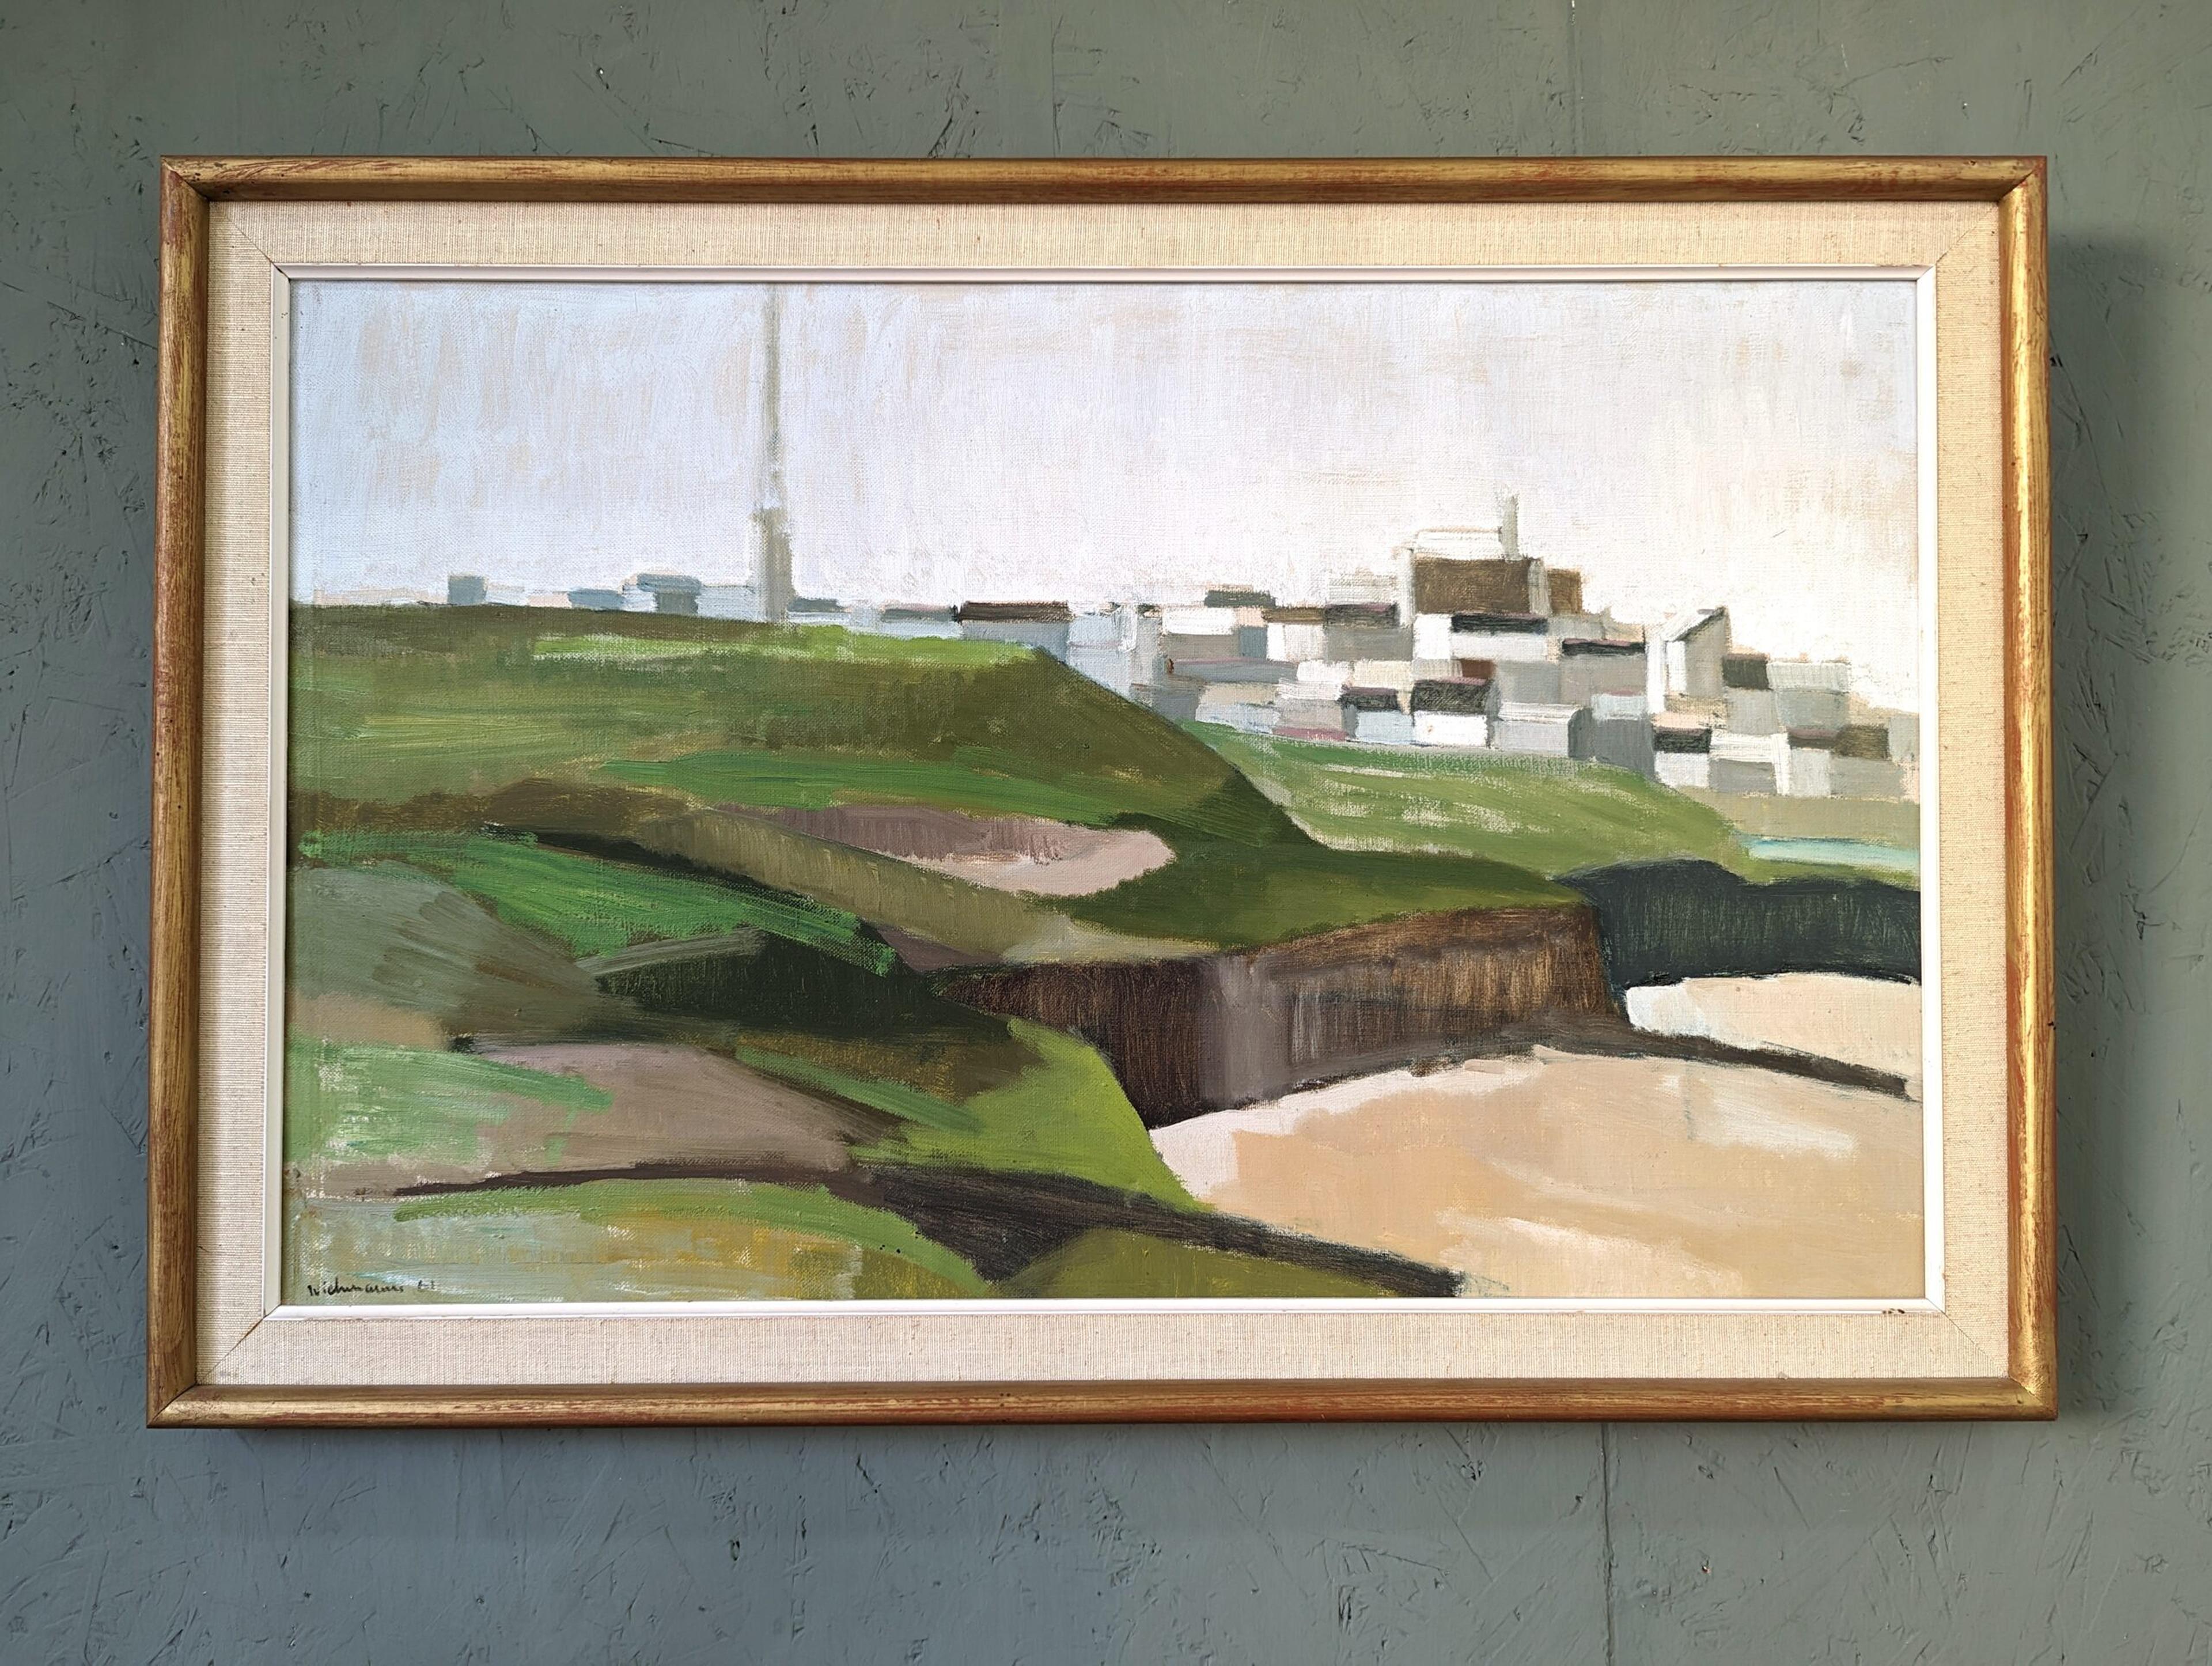 BRITTANY
Size: 49 x 73 cm (including frame)
Oil on Canvas

A panoramic mid century modernist composition in oil, painted onto canvas and dated 1961.

Capturing the dramatic coastline of the French peninsula of Brittany, this painting features long